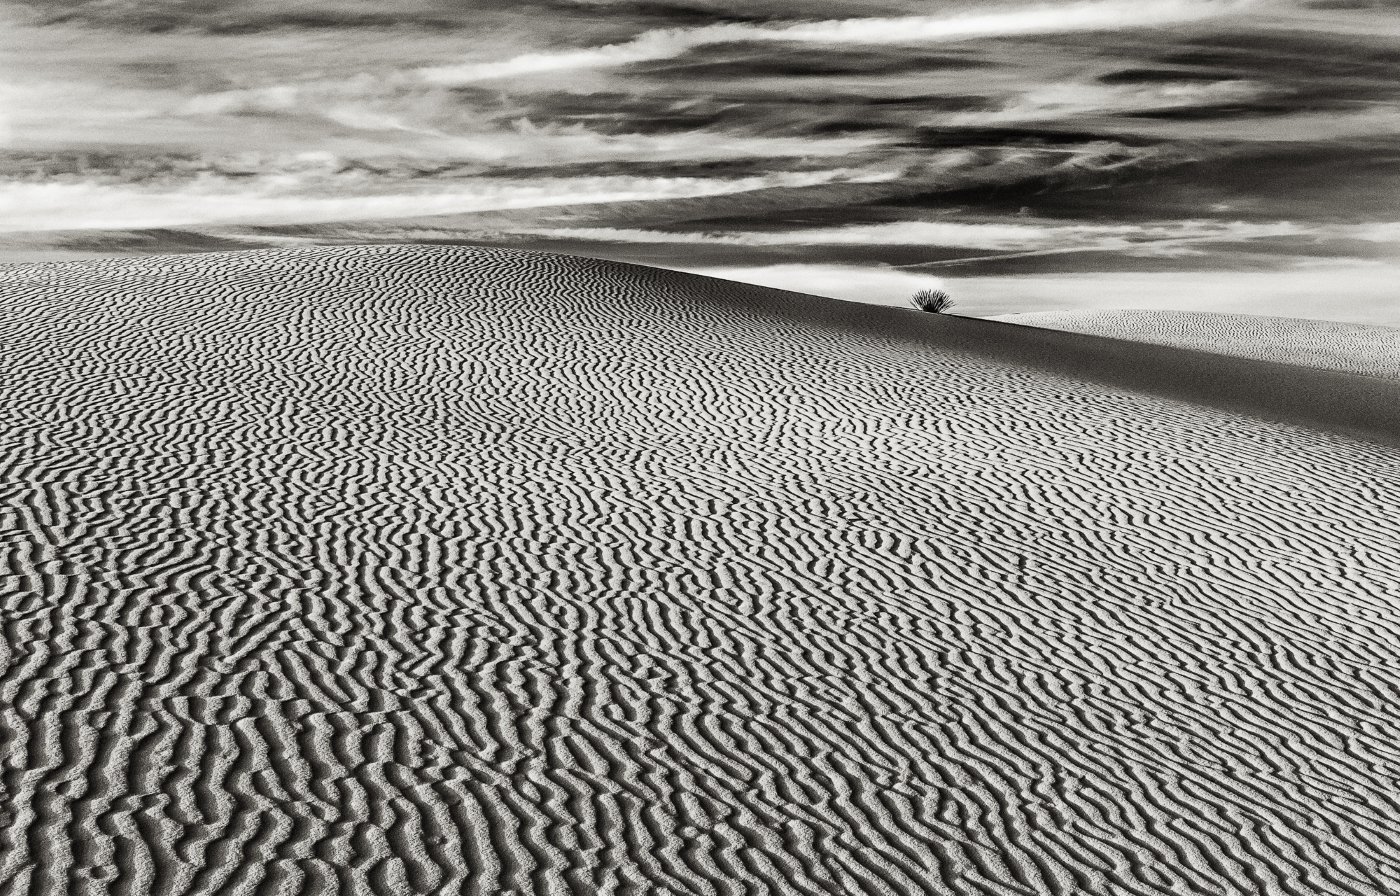 White Sands Minimalism,	Ron Varley, Heard Nature Photography Club, 2nd Place